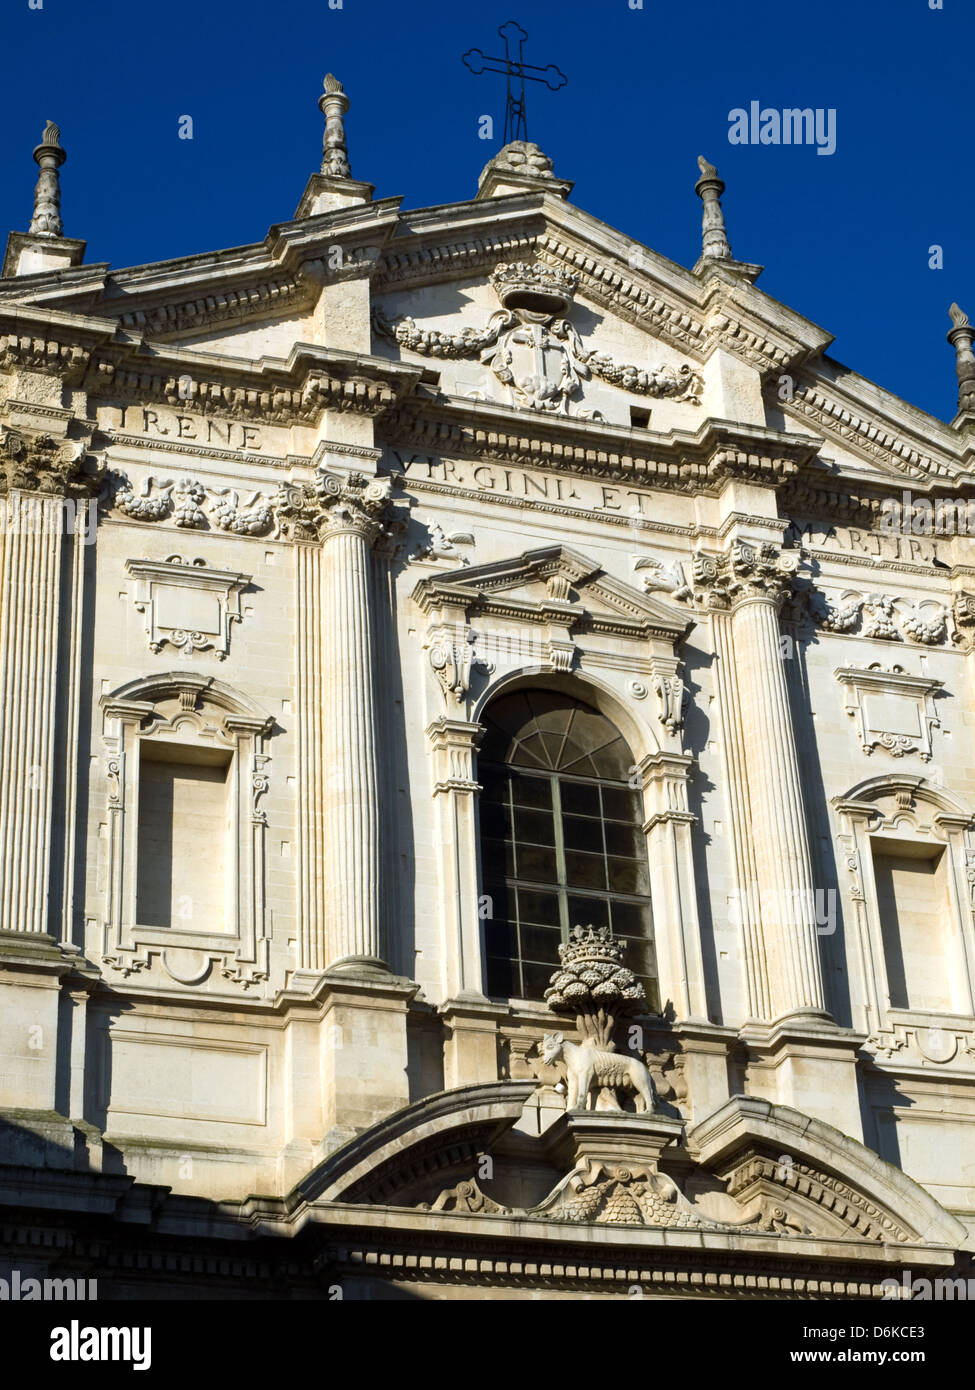 Lecce - Church of St. Irene Teatini - detail of the facade Stock Photo